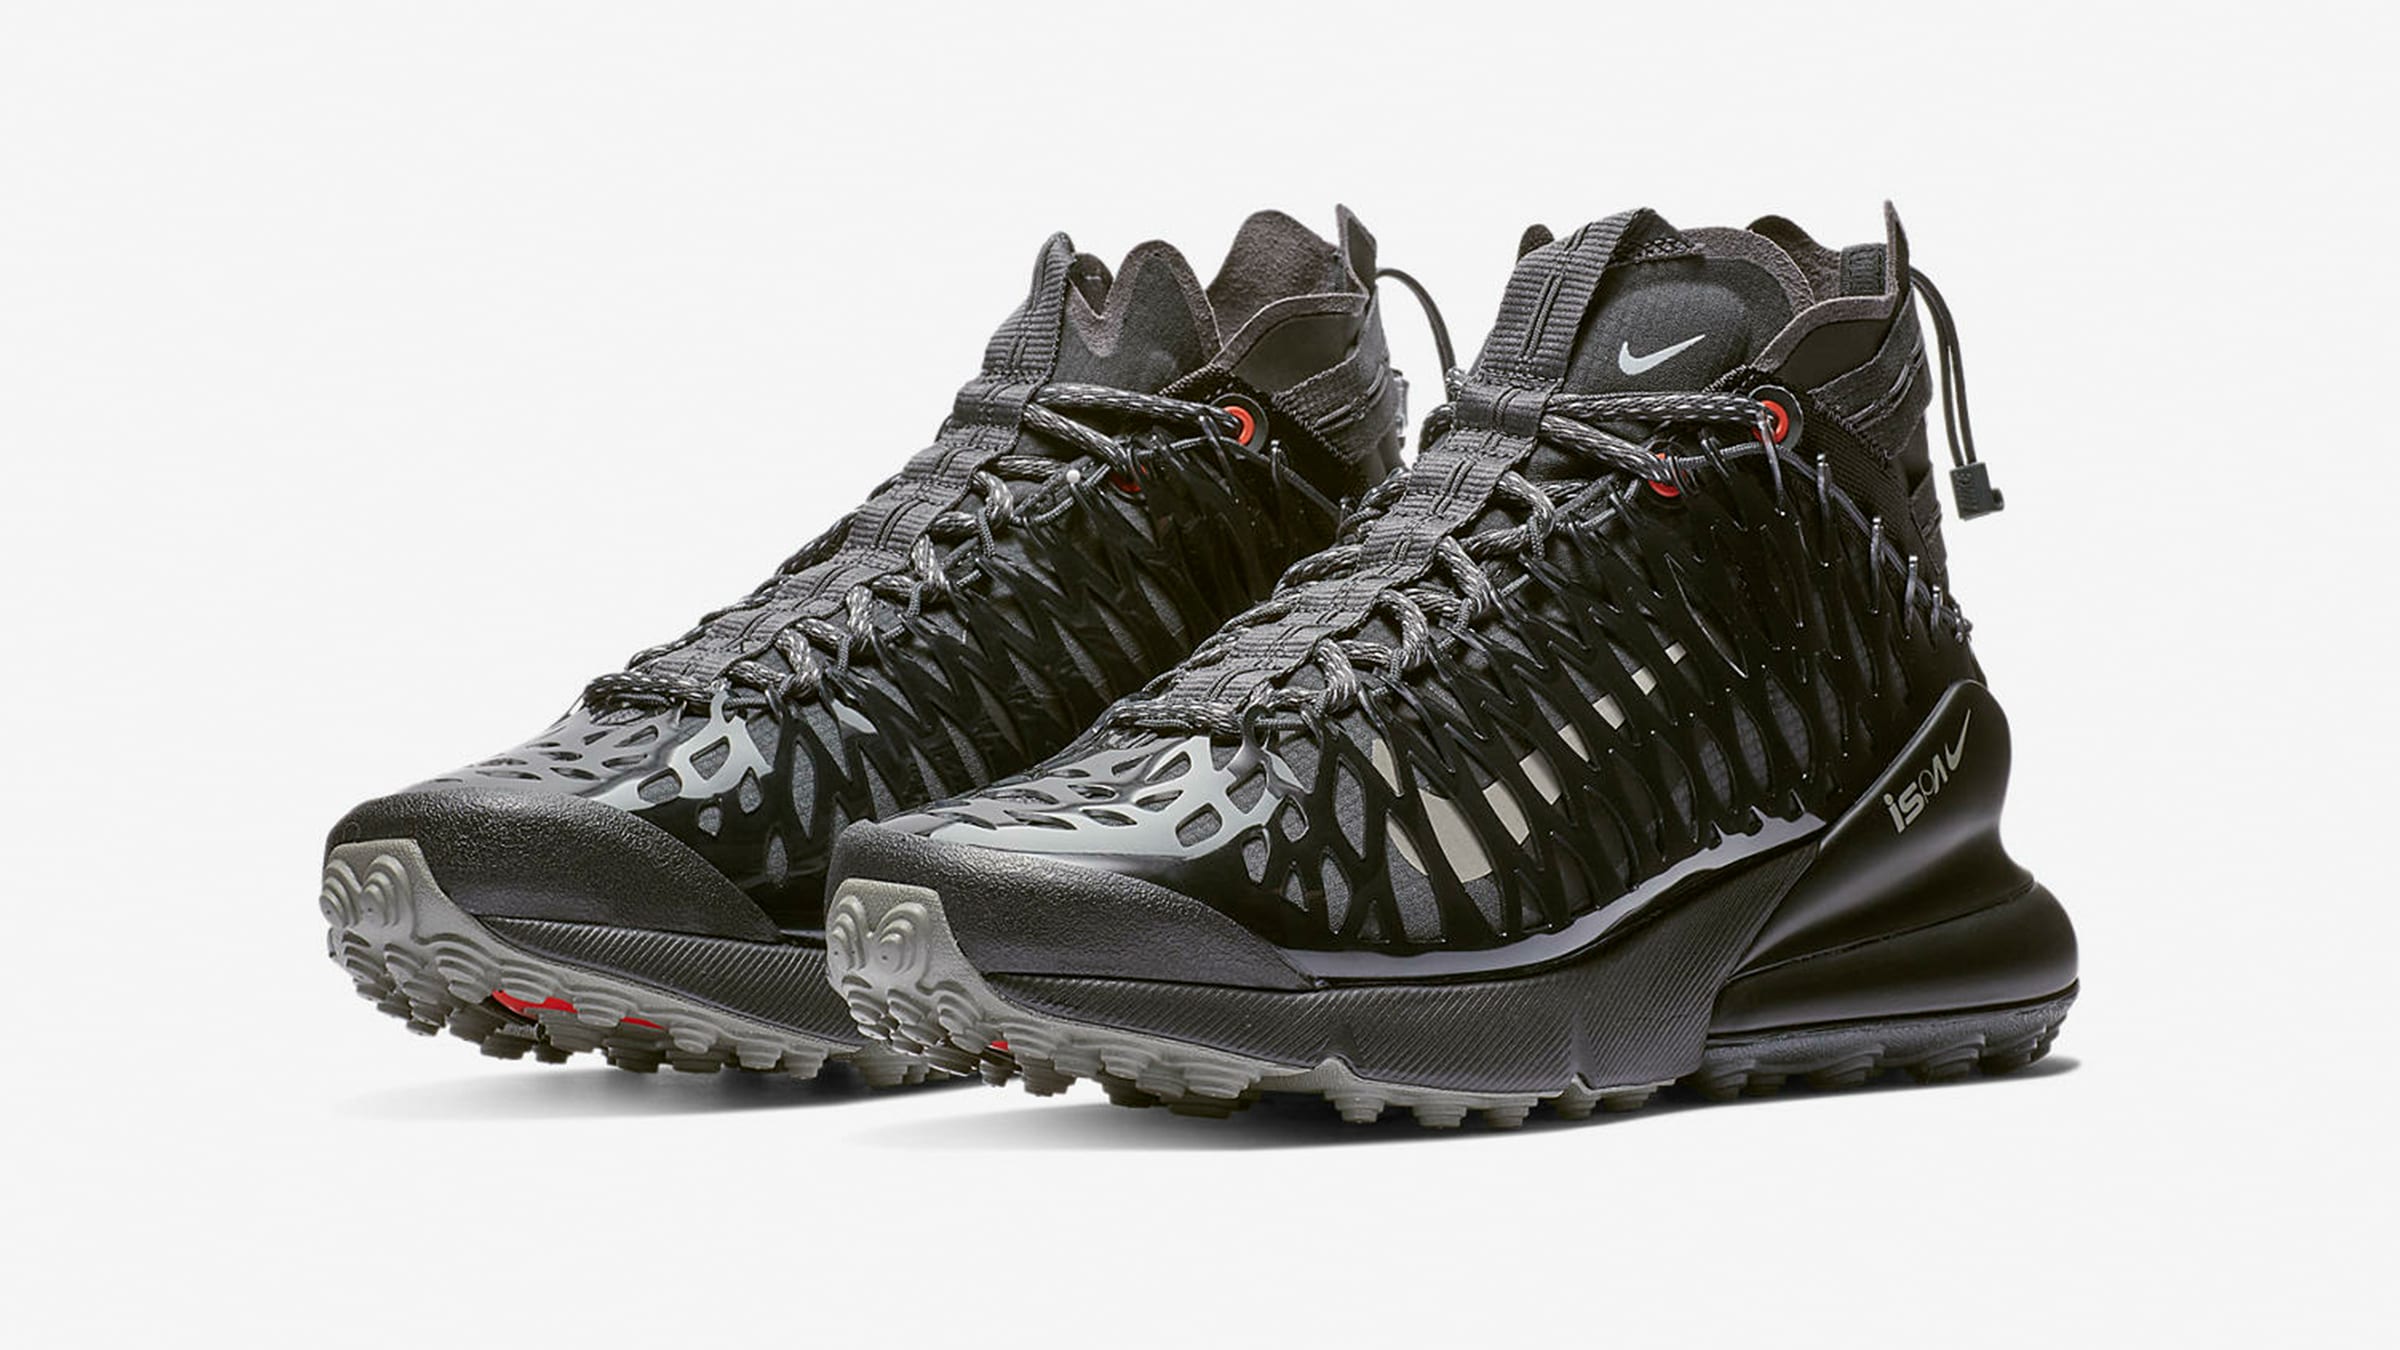 cent Officier Oxide Nike Air Max 270 ISPA (Black & Anthracite) | END. Launches